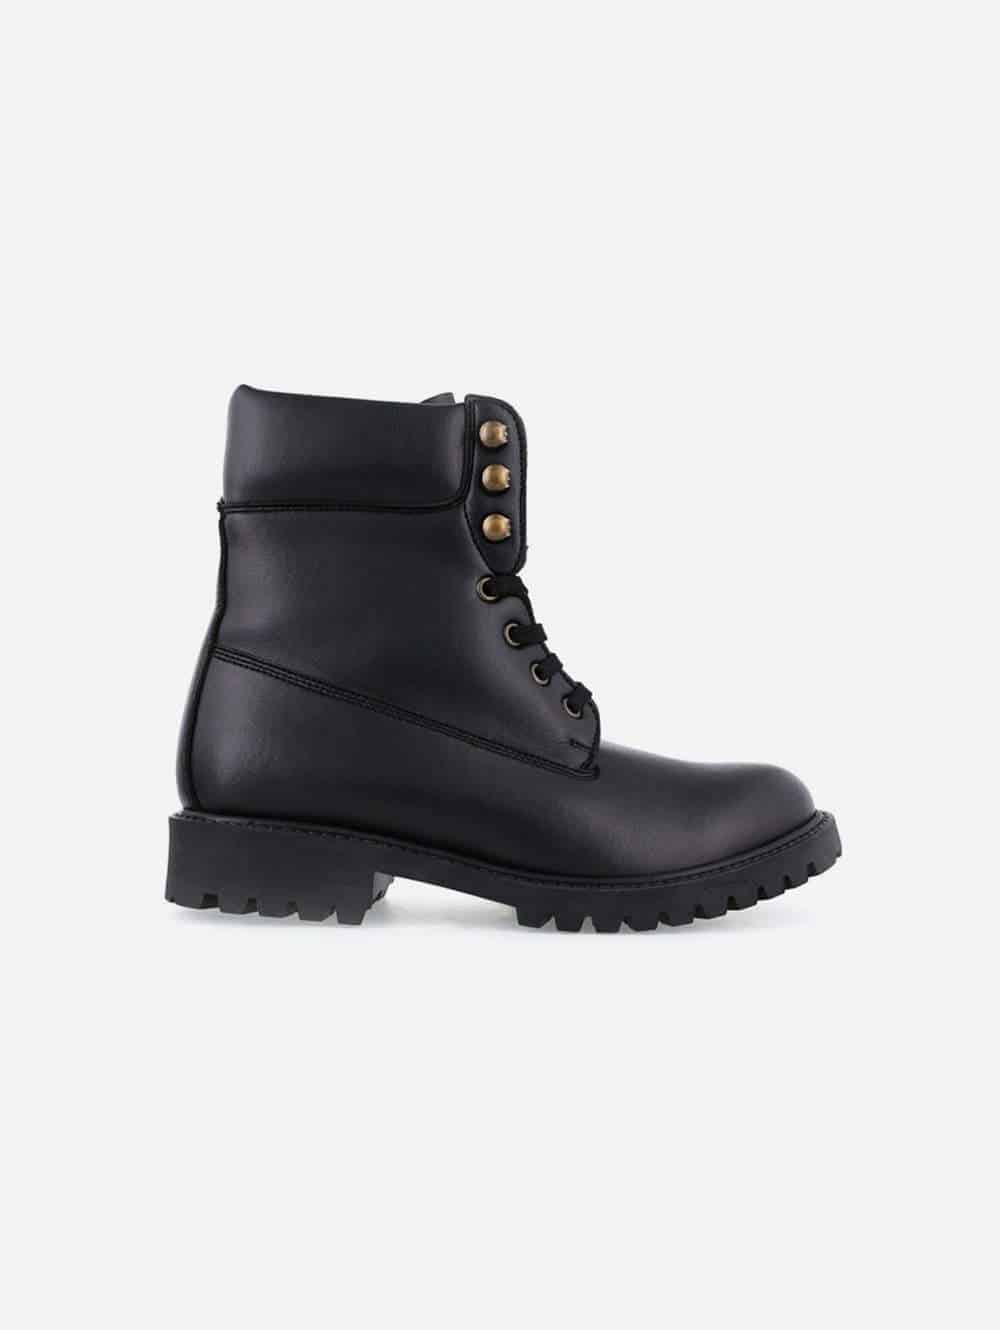 Solid black vegan leather lace up boots